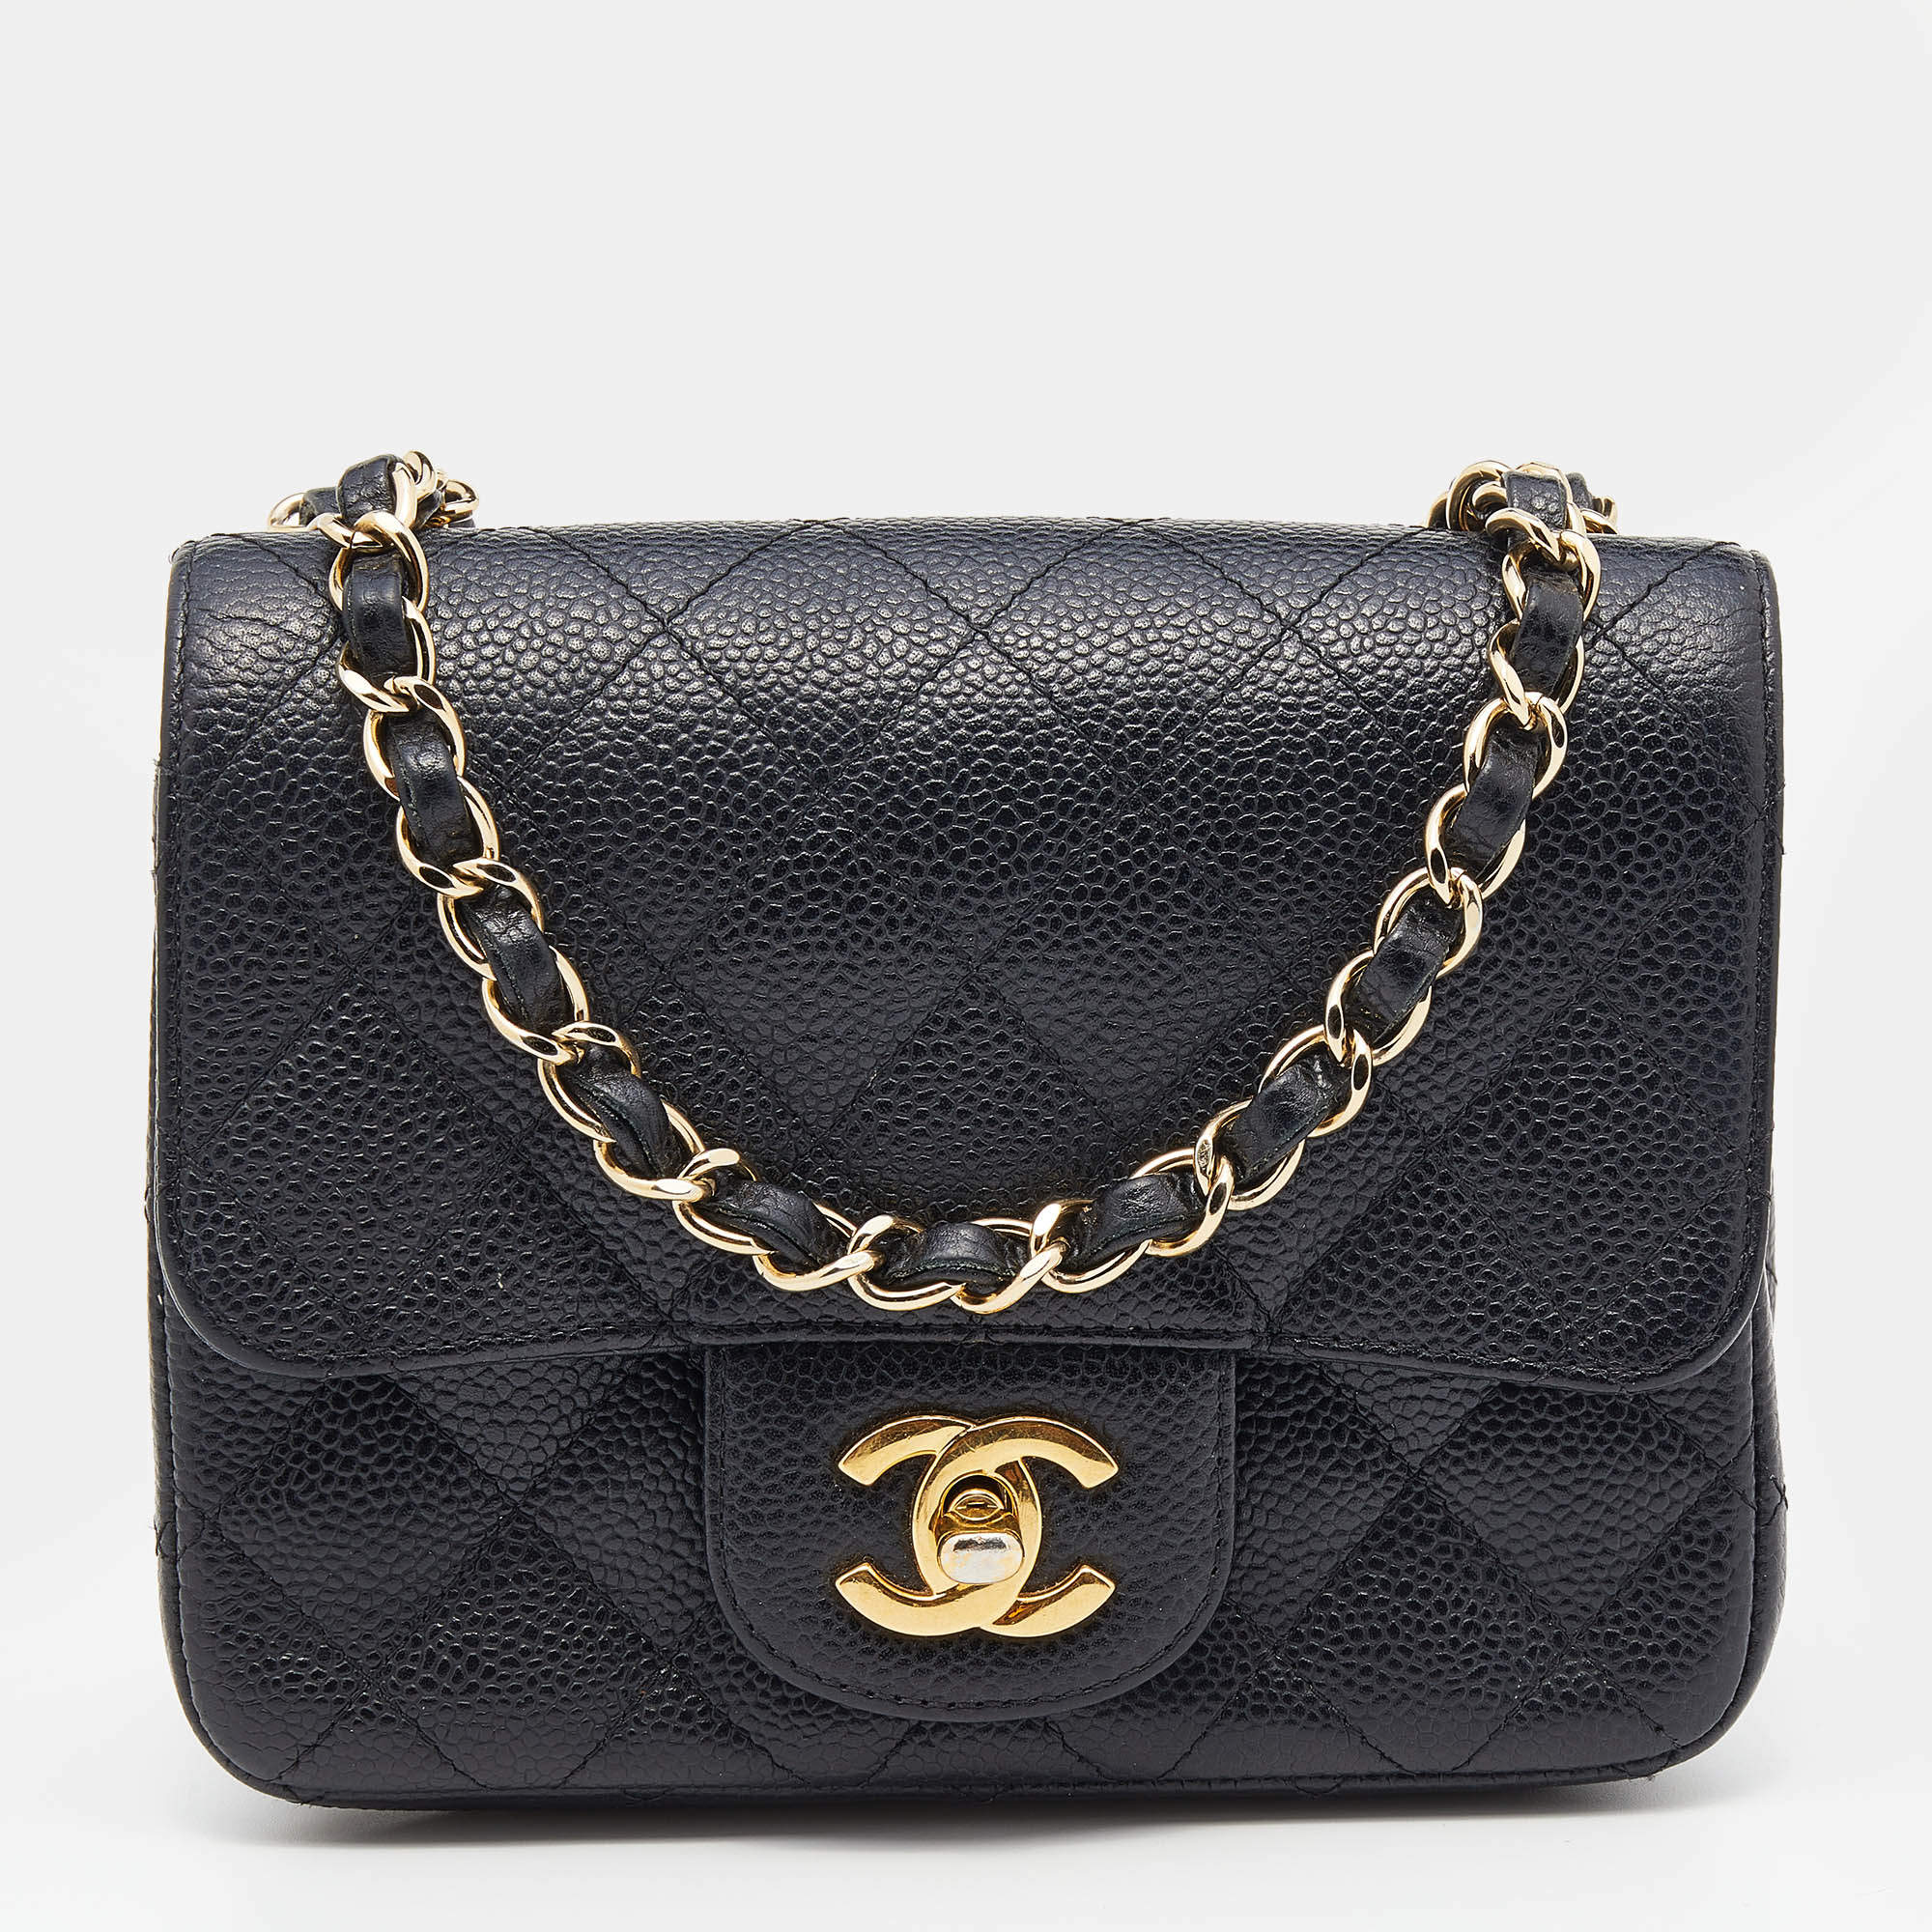 Chanel Black Quilted Caviar Leather Classic Mini Square Flap Bag